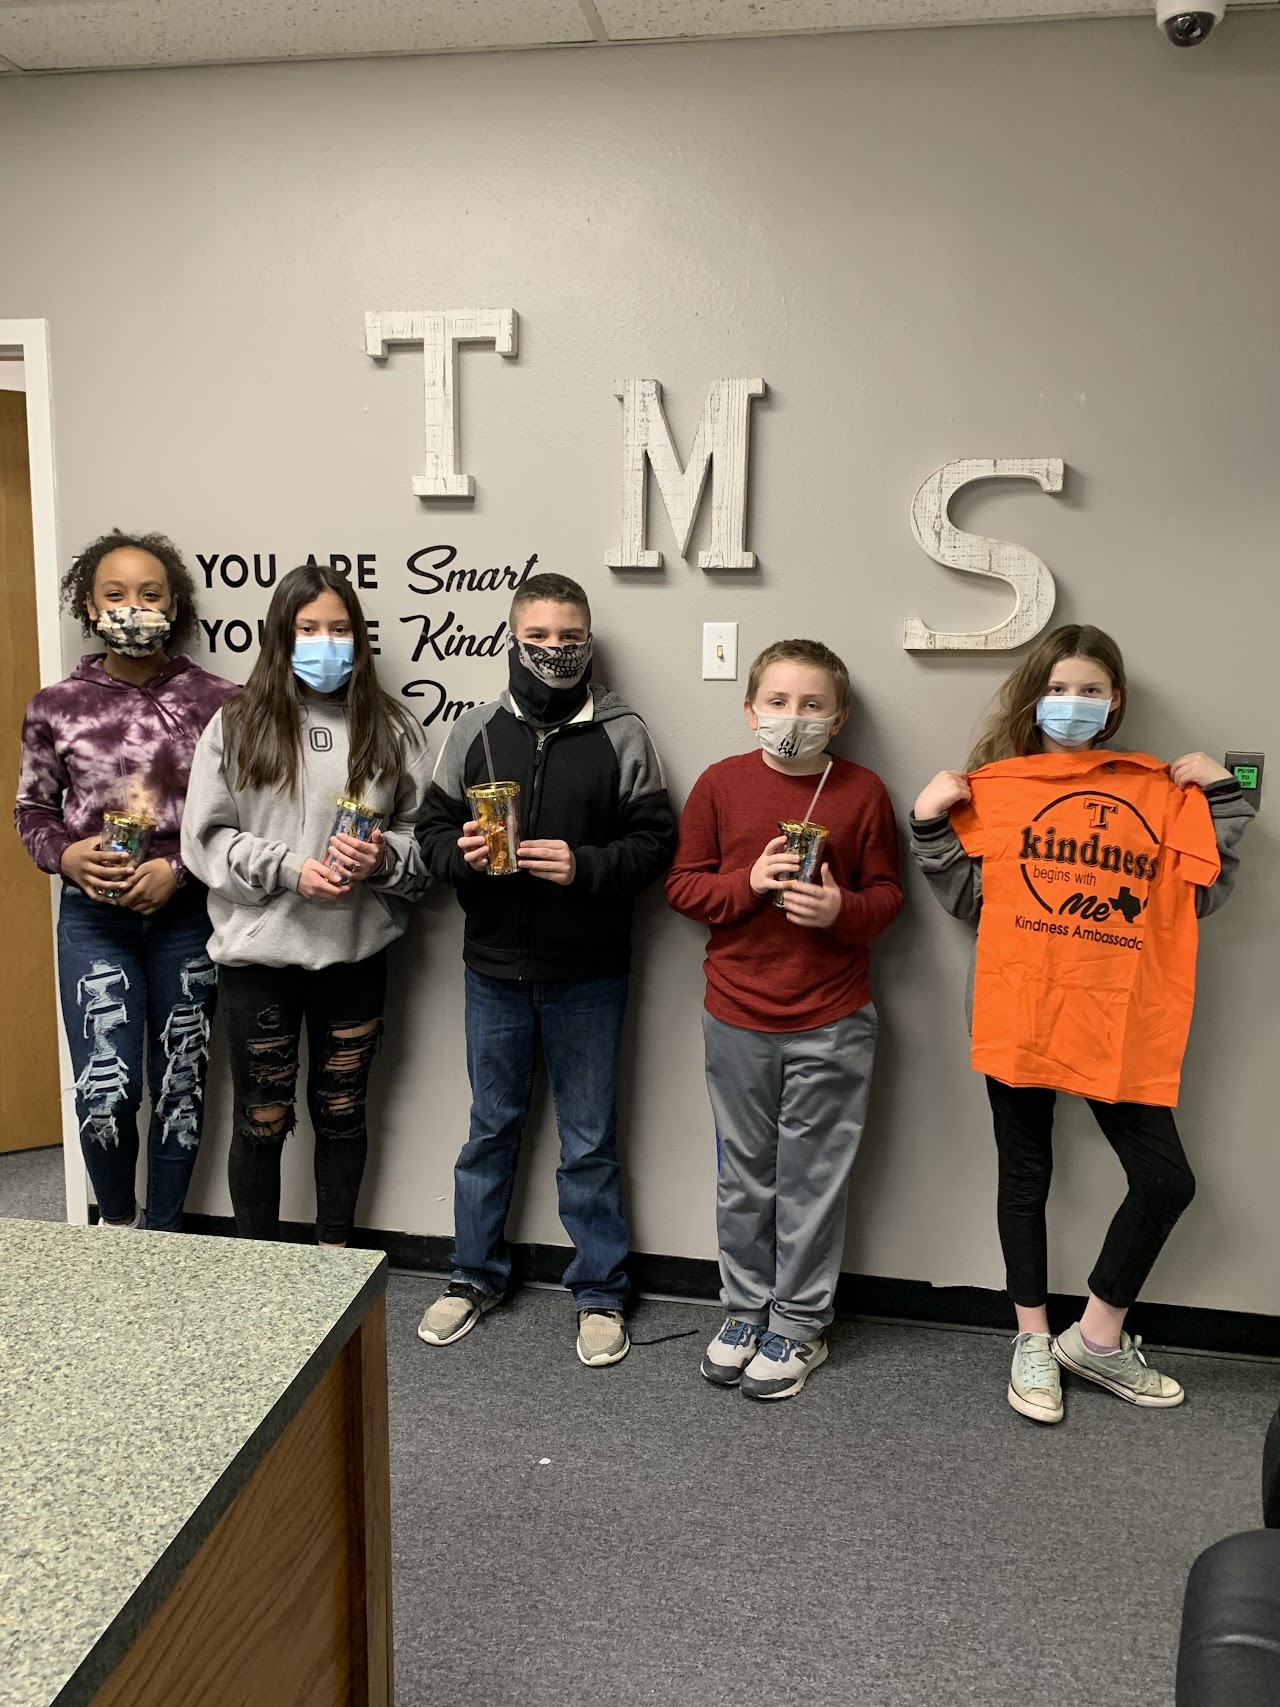 Five students with masks on holding cups and a t shirt